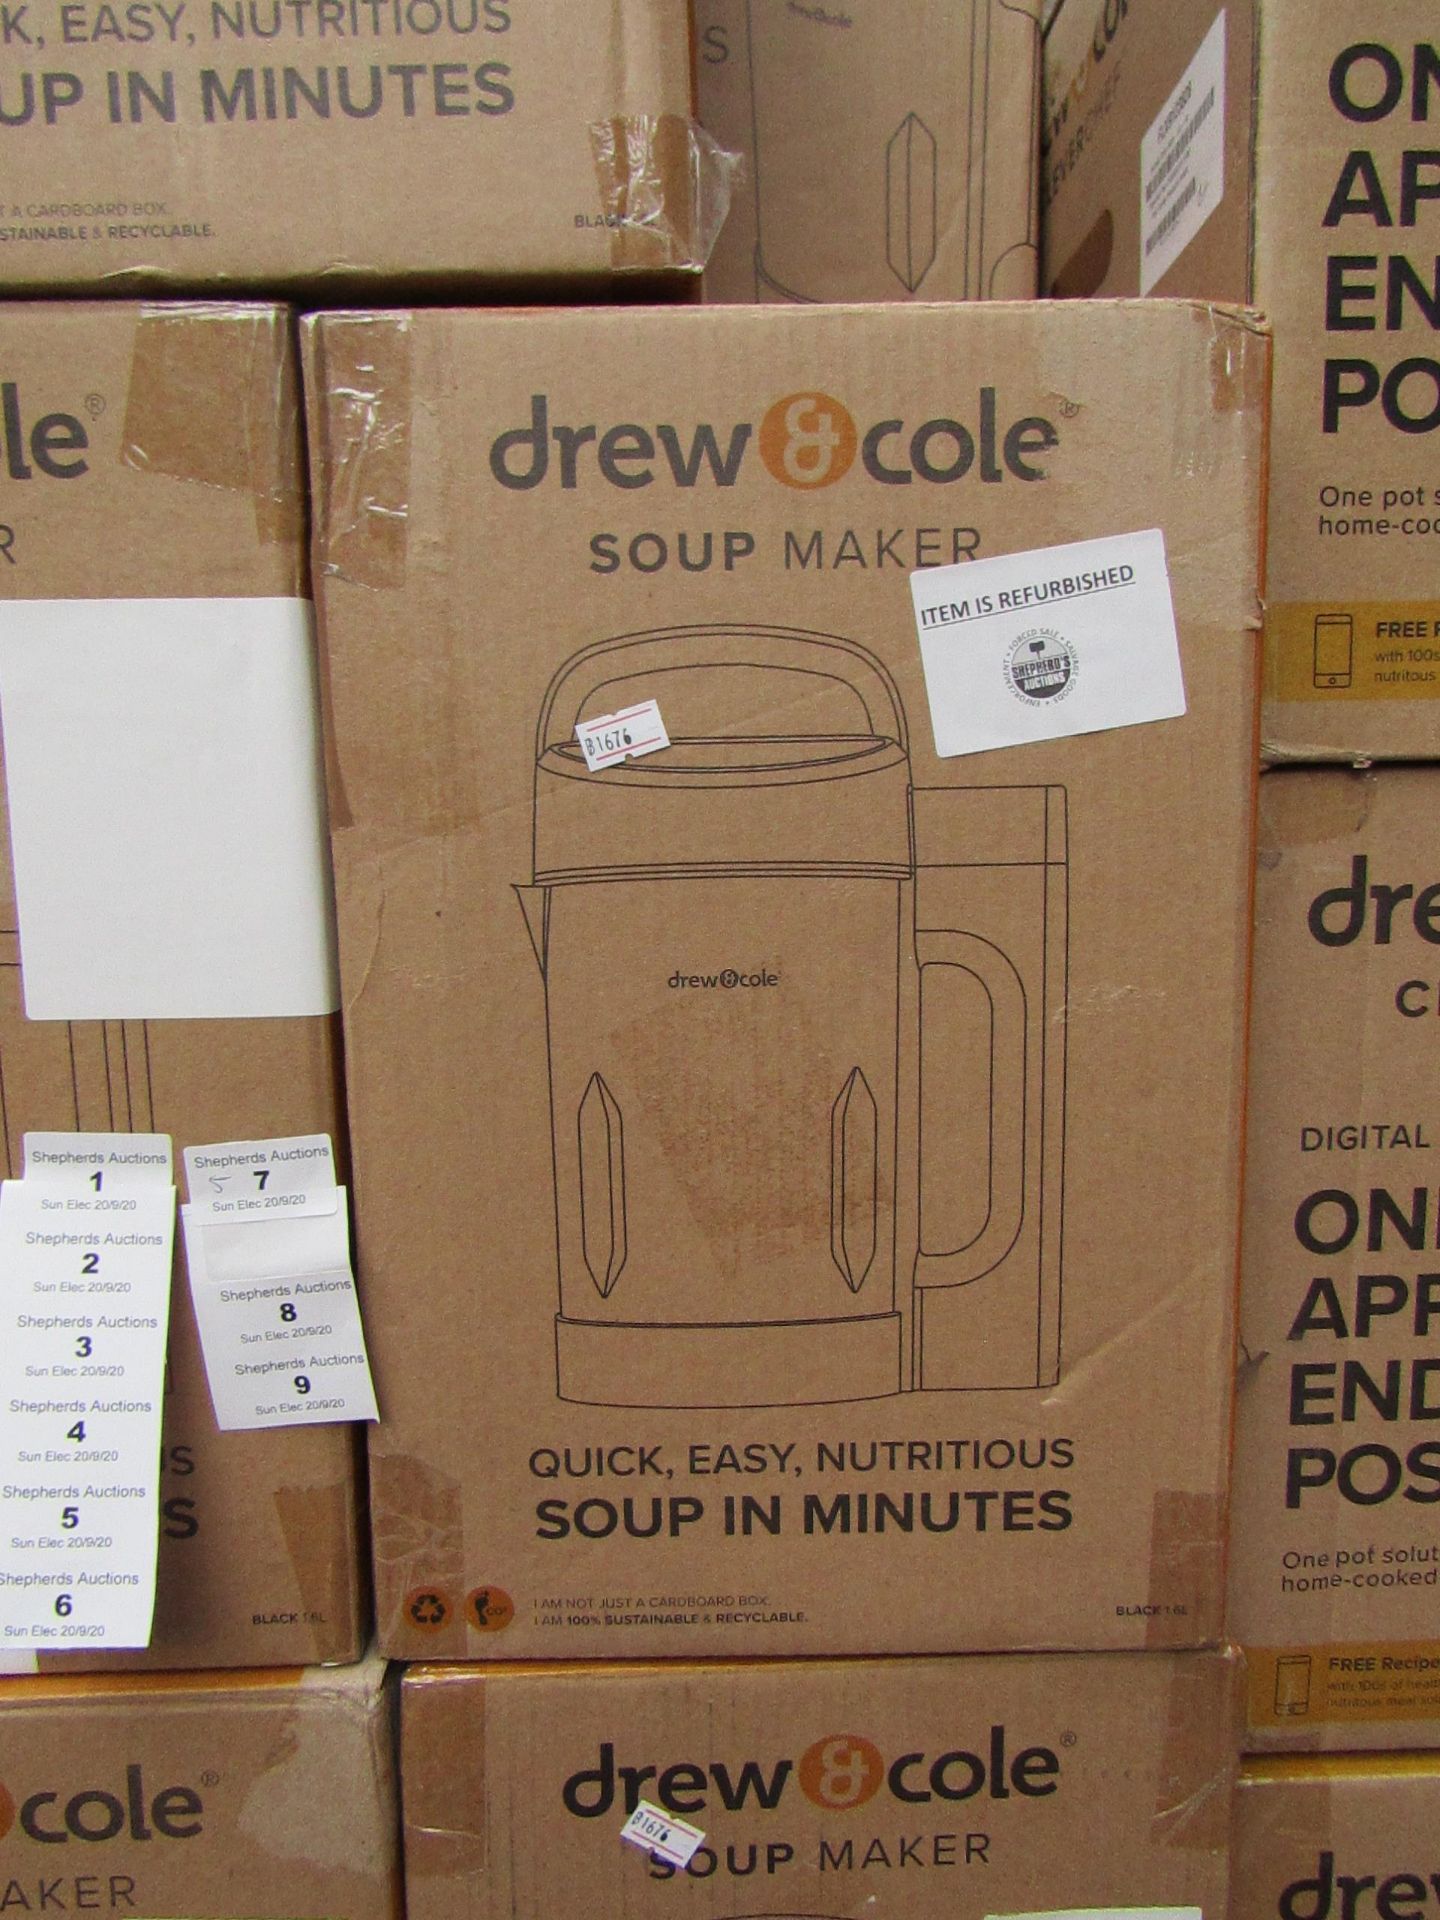 | 5X | DREW AND COLE SOUP CHEF | BOXED AND REFURBISHED | NO ONLINE RESALE | SKU C5060541516809 | RRP